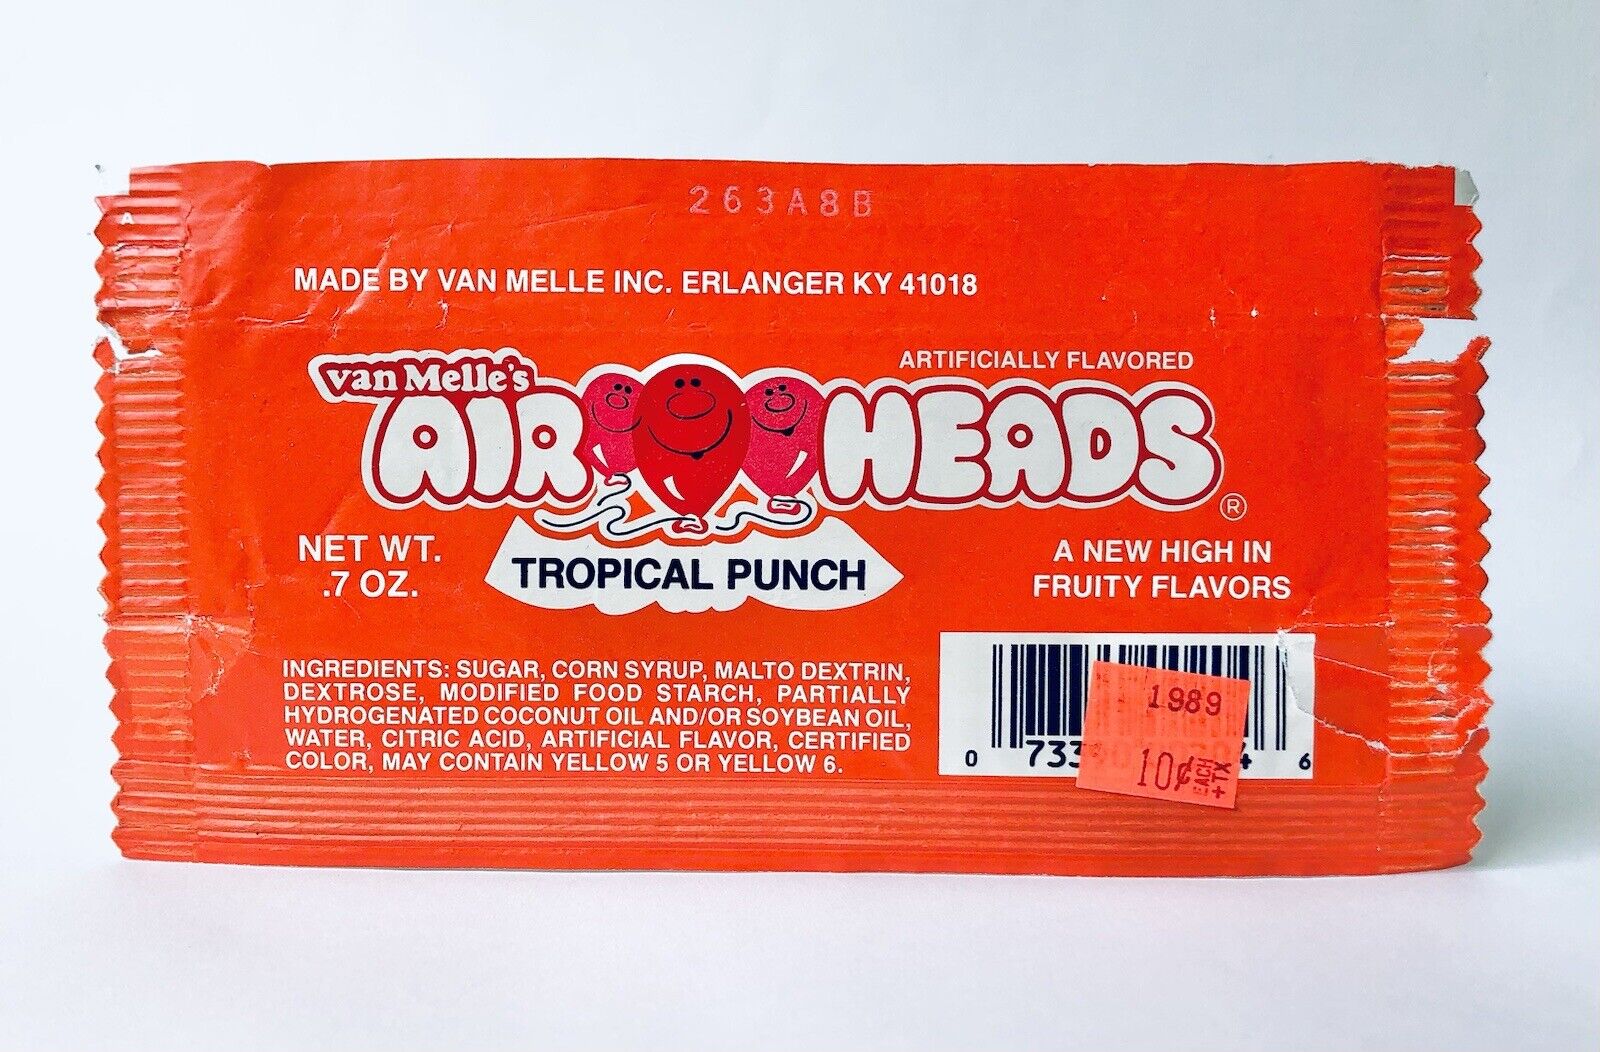 Vintage 1989 Van Melle AIR HEADS Taffy Candy Wrapper 5.75” container TROPICAL